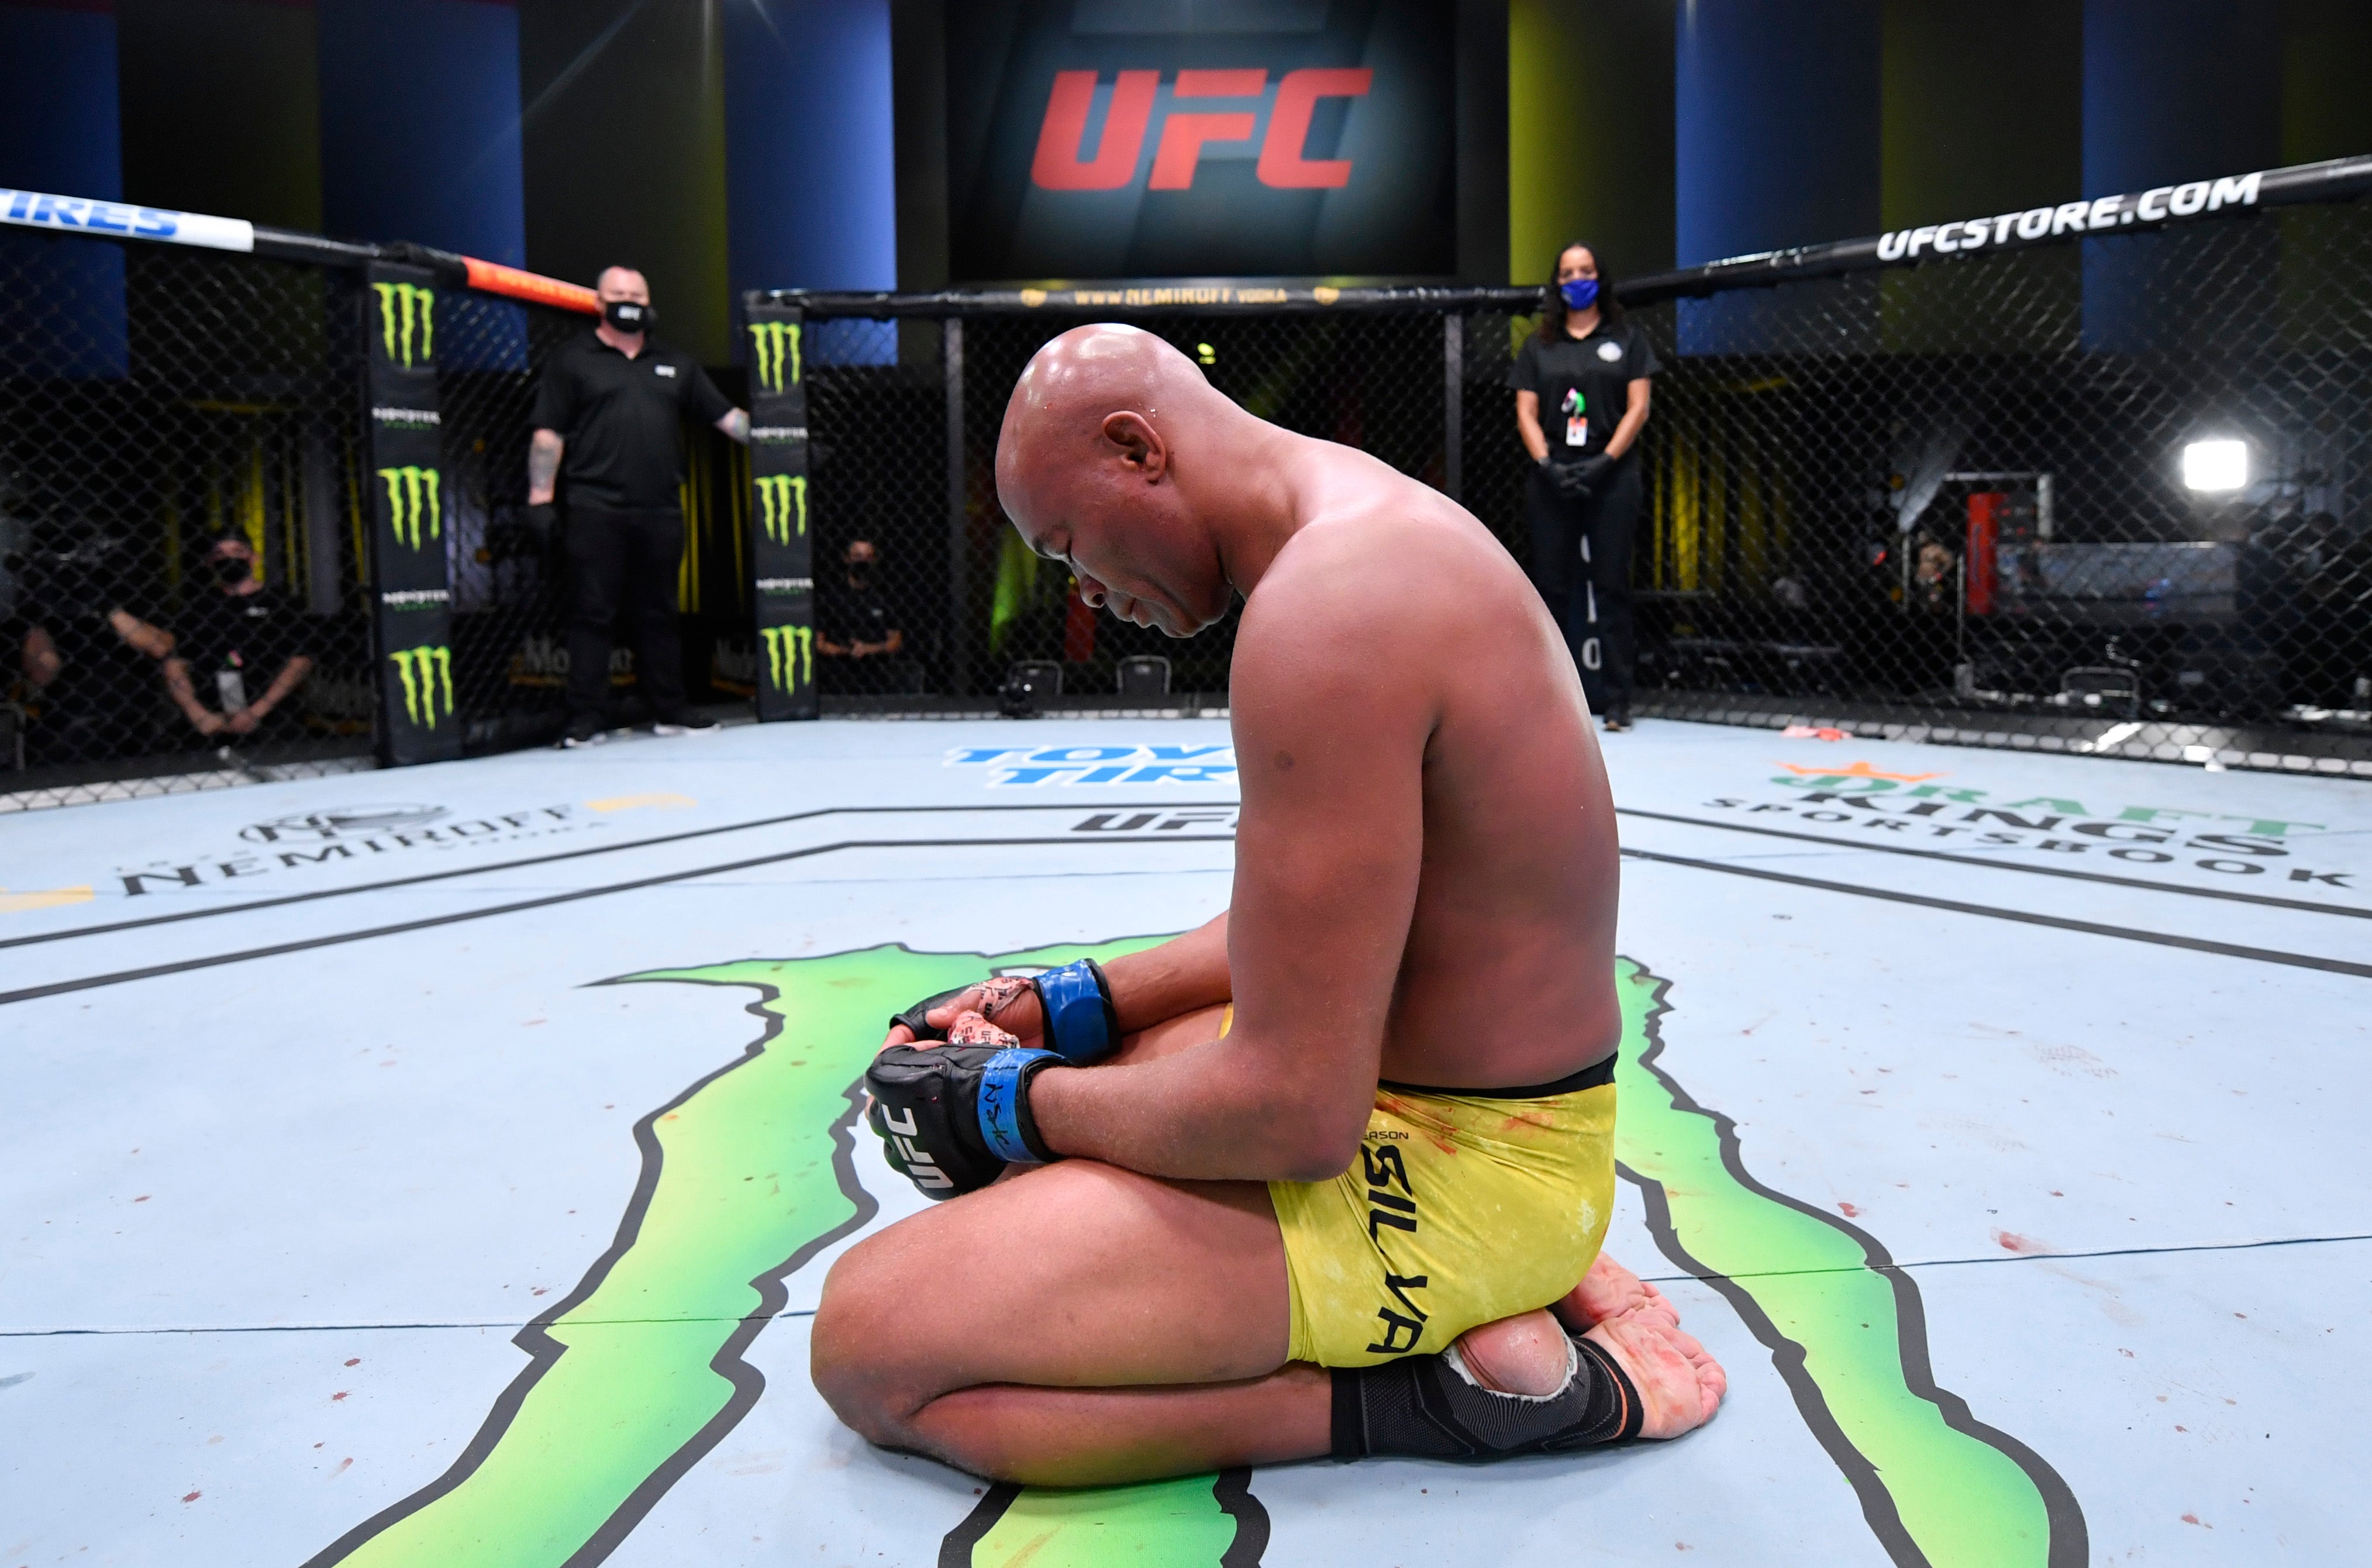 Silva after his final UFC bout in 2020